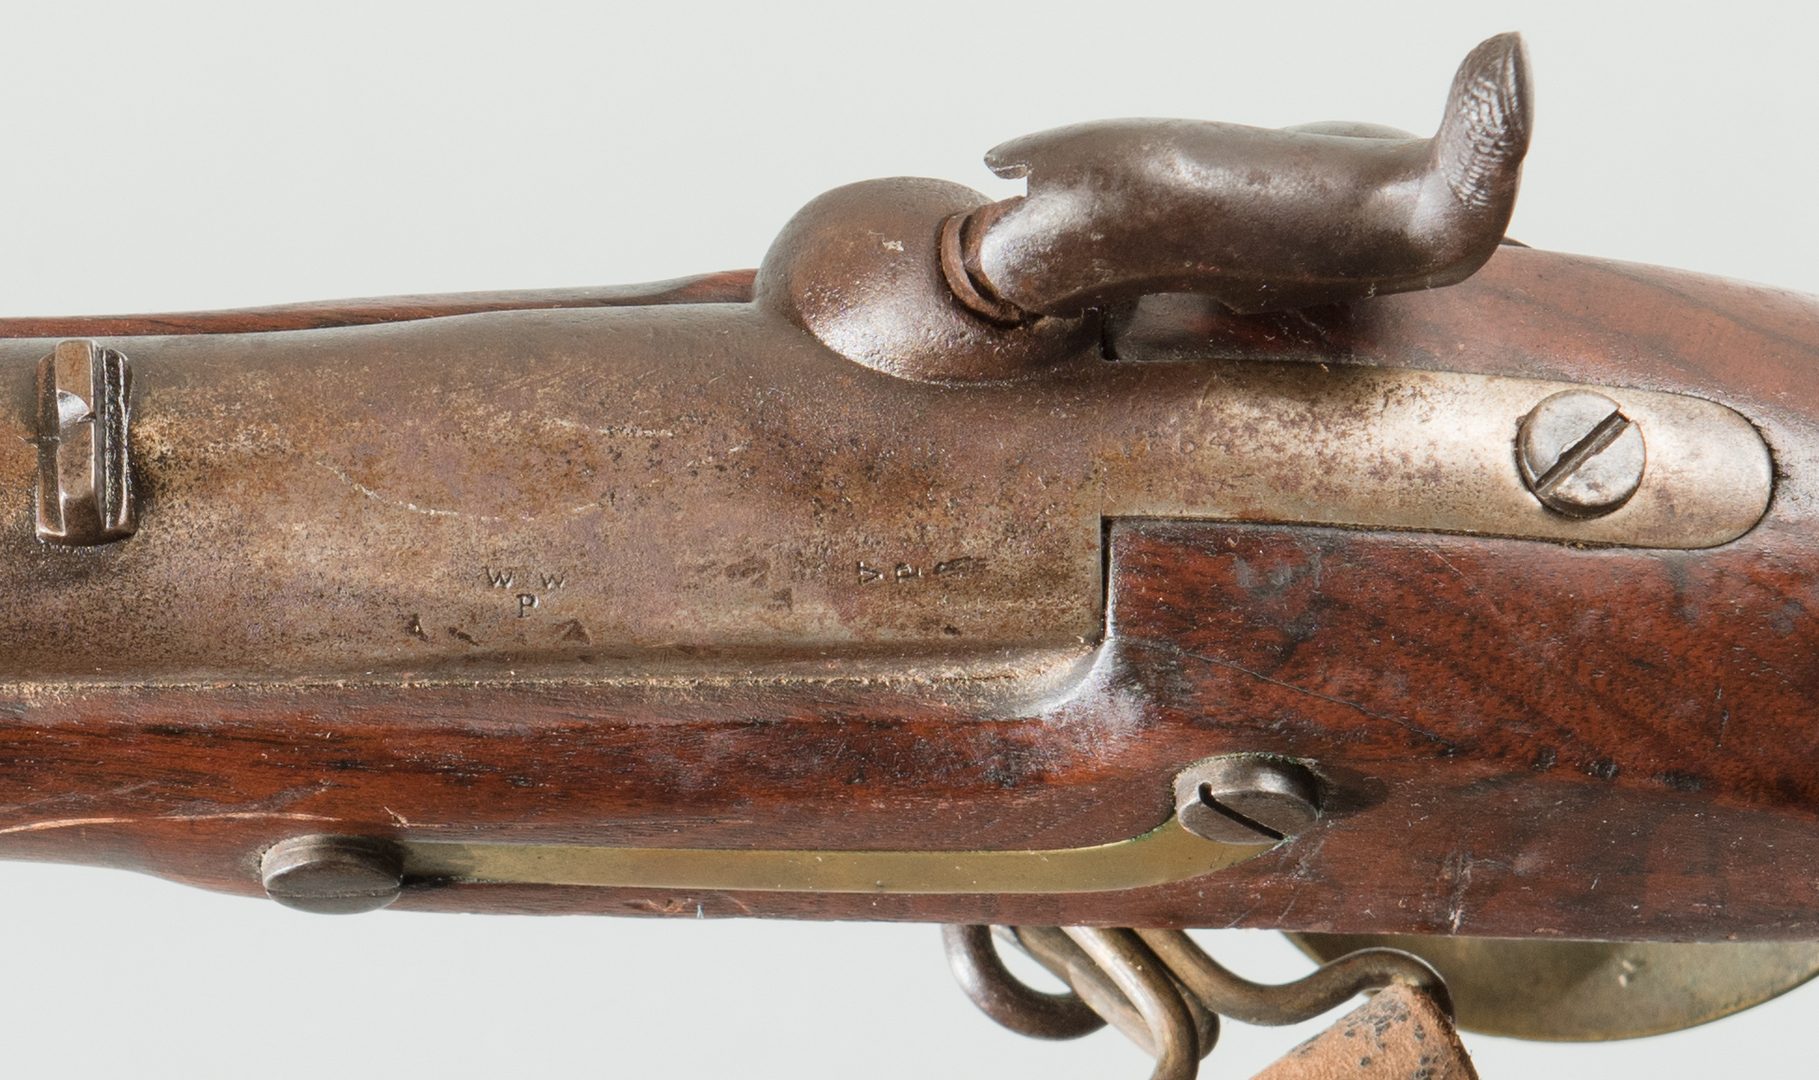 Lot 830: Harpers Ferry Modified Rifle, 58 Cal.